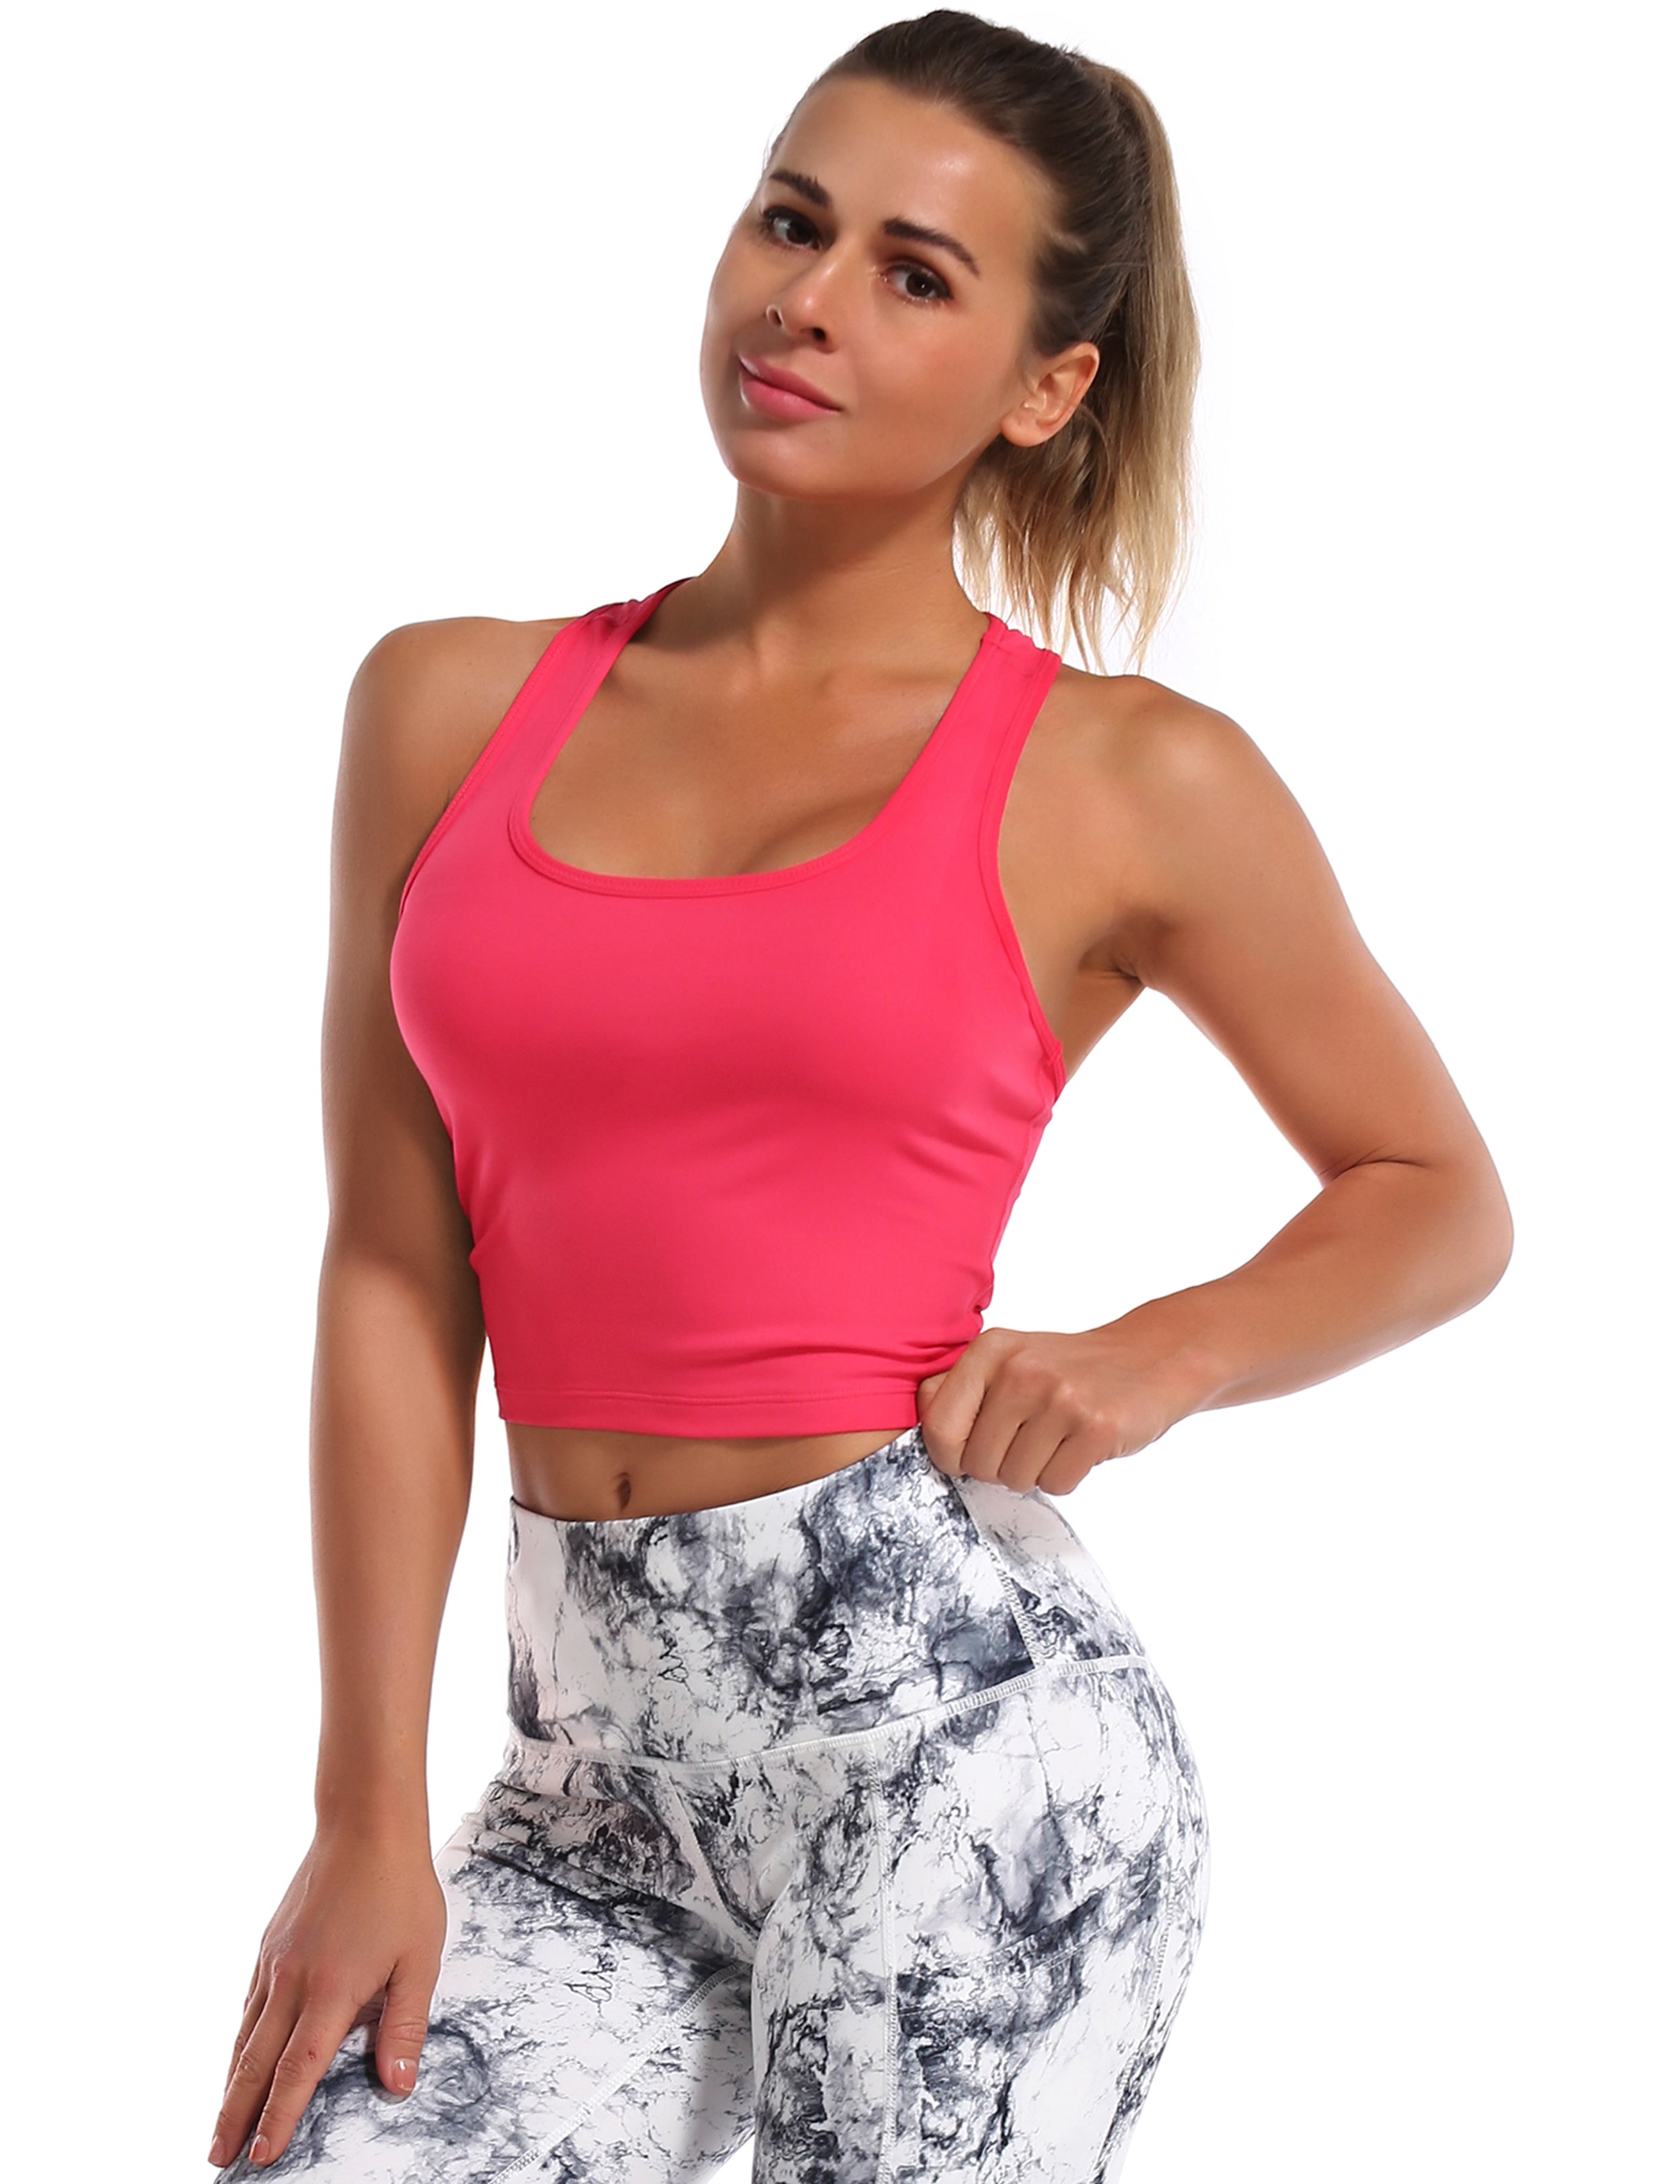 Racerback Athletic Crop Tank Tops red 92%Nylon/8%Spandex(Cotton Soft) Designed for Yoga Tight Fit So buttery soft, it feels weightless Sweat-wicking Four-way stretch Breathable Contours your body Sits below the waistband for moderate, everyday coverage